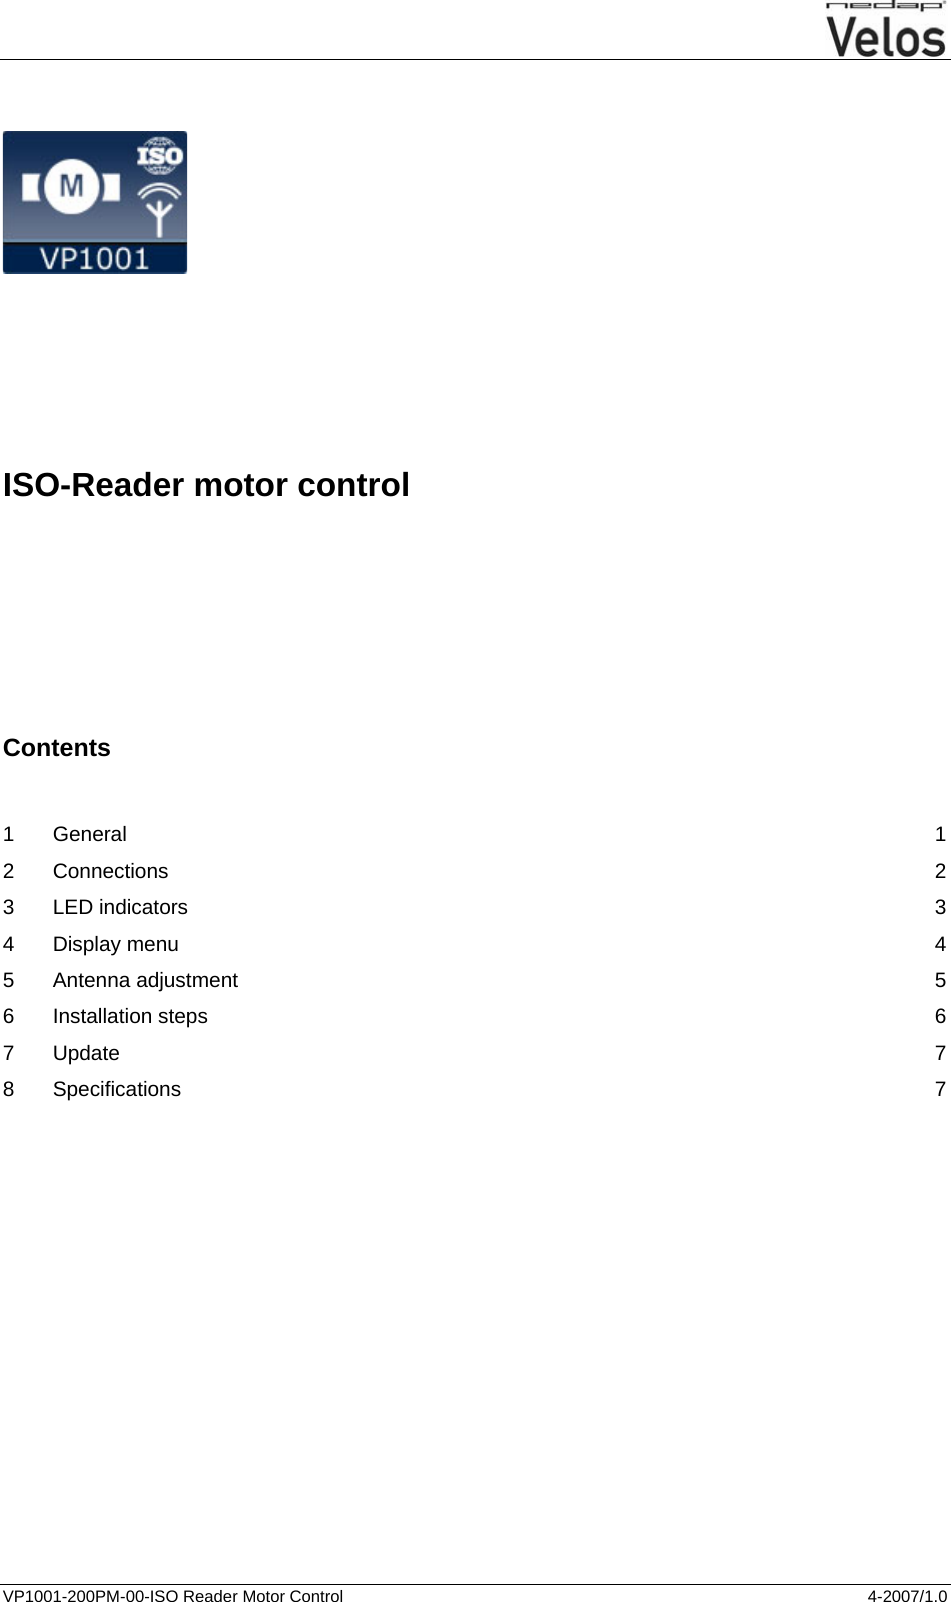  VP1001-200PM-00-ISO Reader Motor Control  4-2007/1.0                ISO-Reader motor control          Contents   1 General  1 2 Connections  2 3 LED indicators  3 4 Display menu  4 5 Antenna adjustment  5 6 Installation steps  6 7 Update  7 8 Specifications  7  